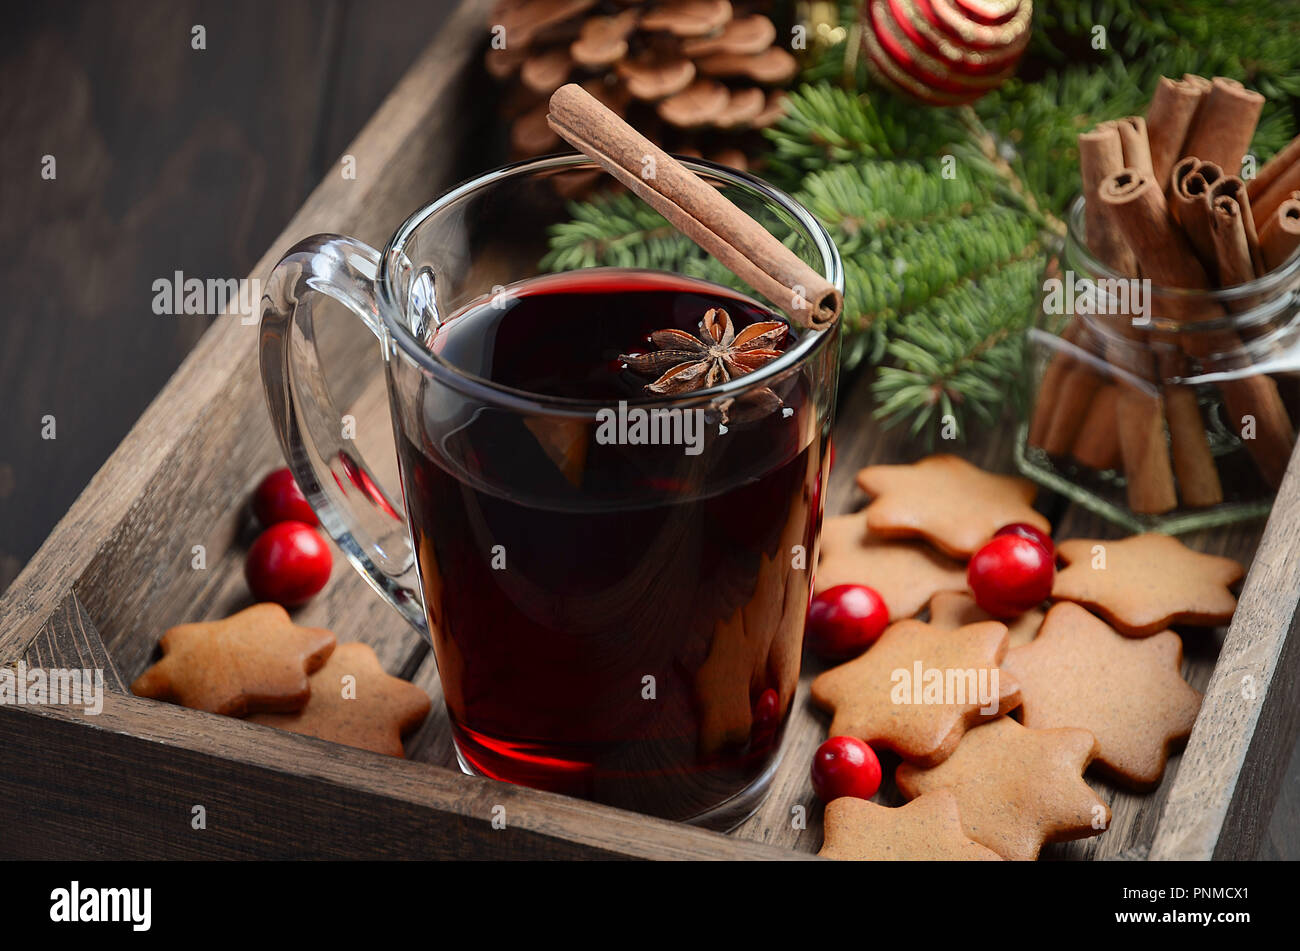 Christmas mulled wine. Holiday concept decorated with Fir branches, Gingerbread Cookies and Cranberries on dark wooden tray. Stock Photo